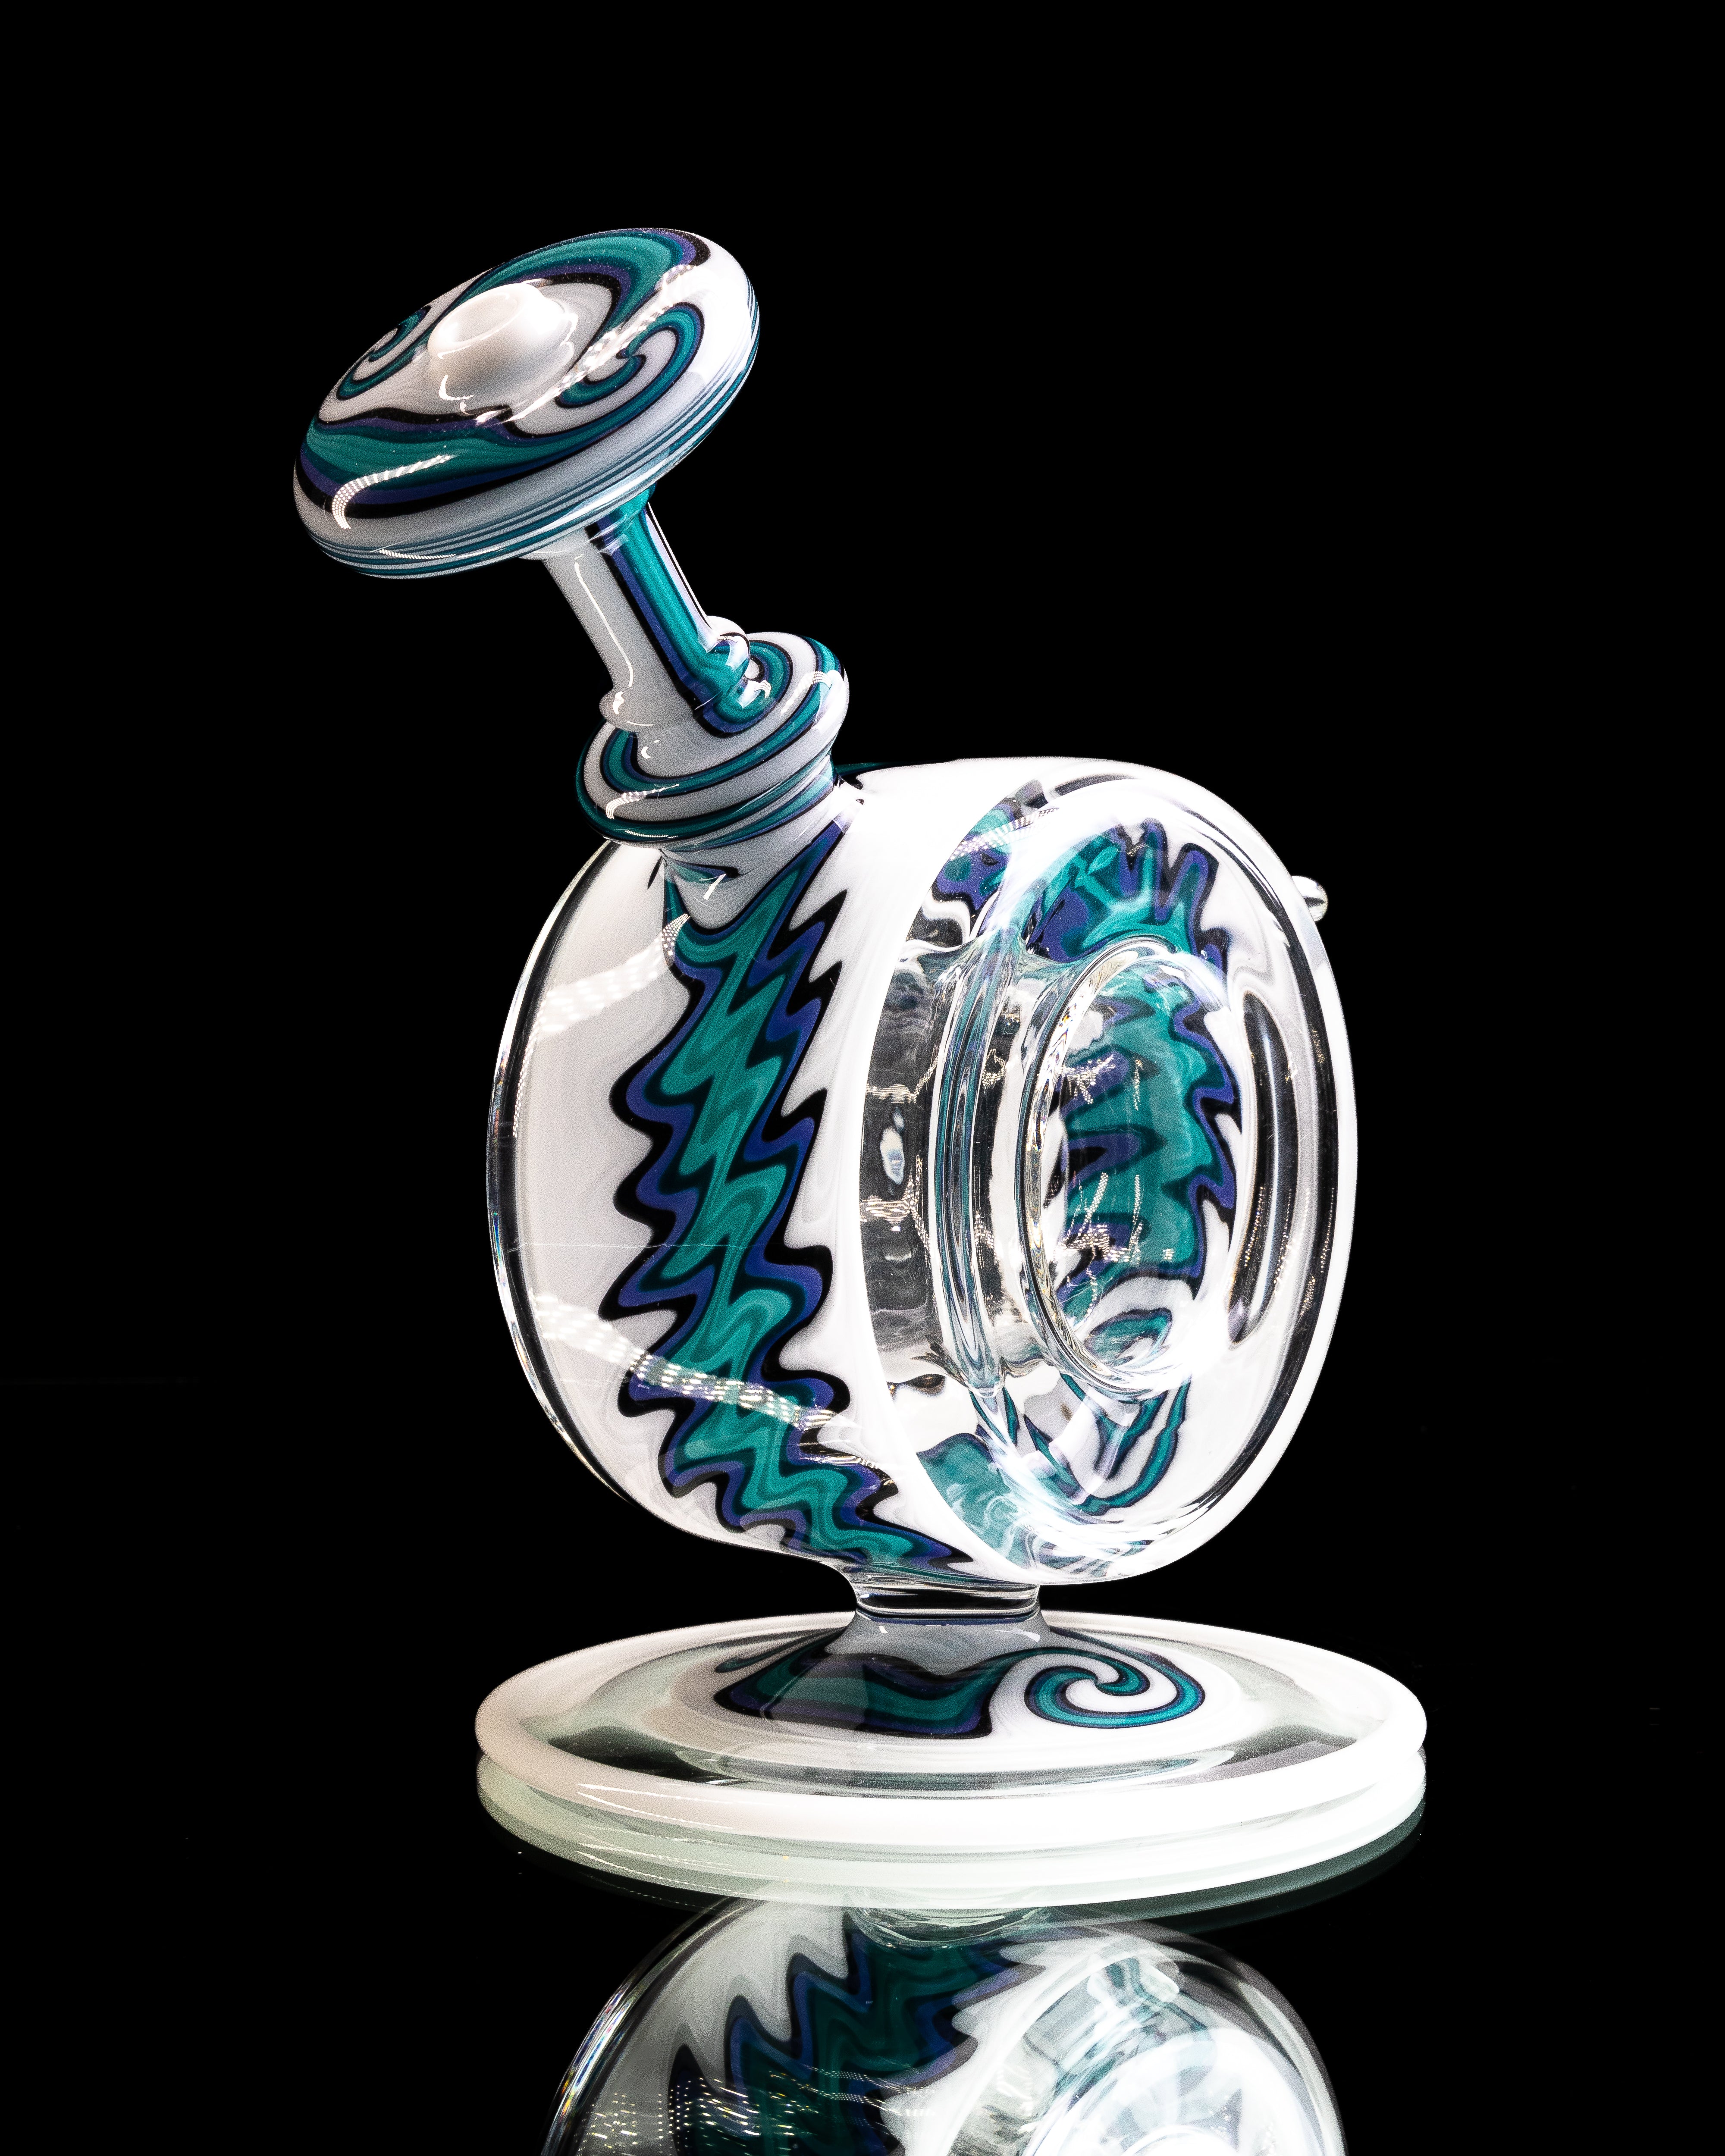 Coojo - White/Blue Worked Donut Rig